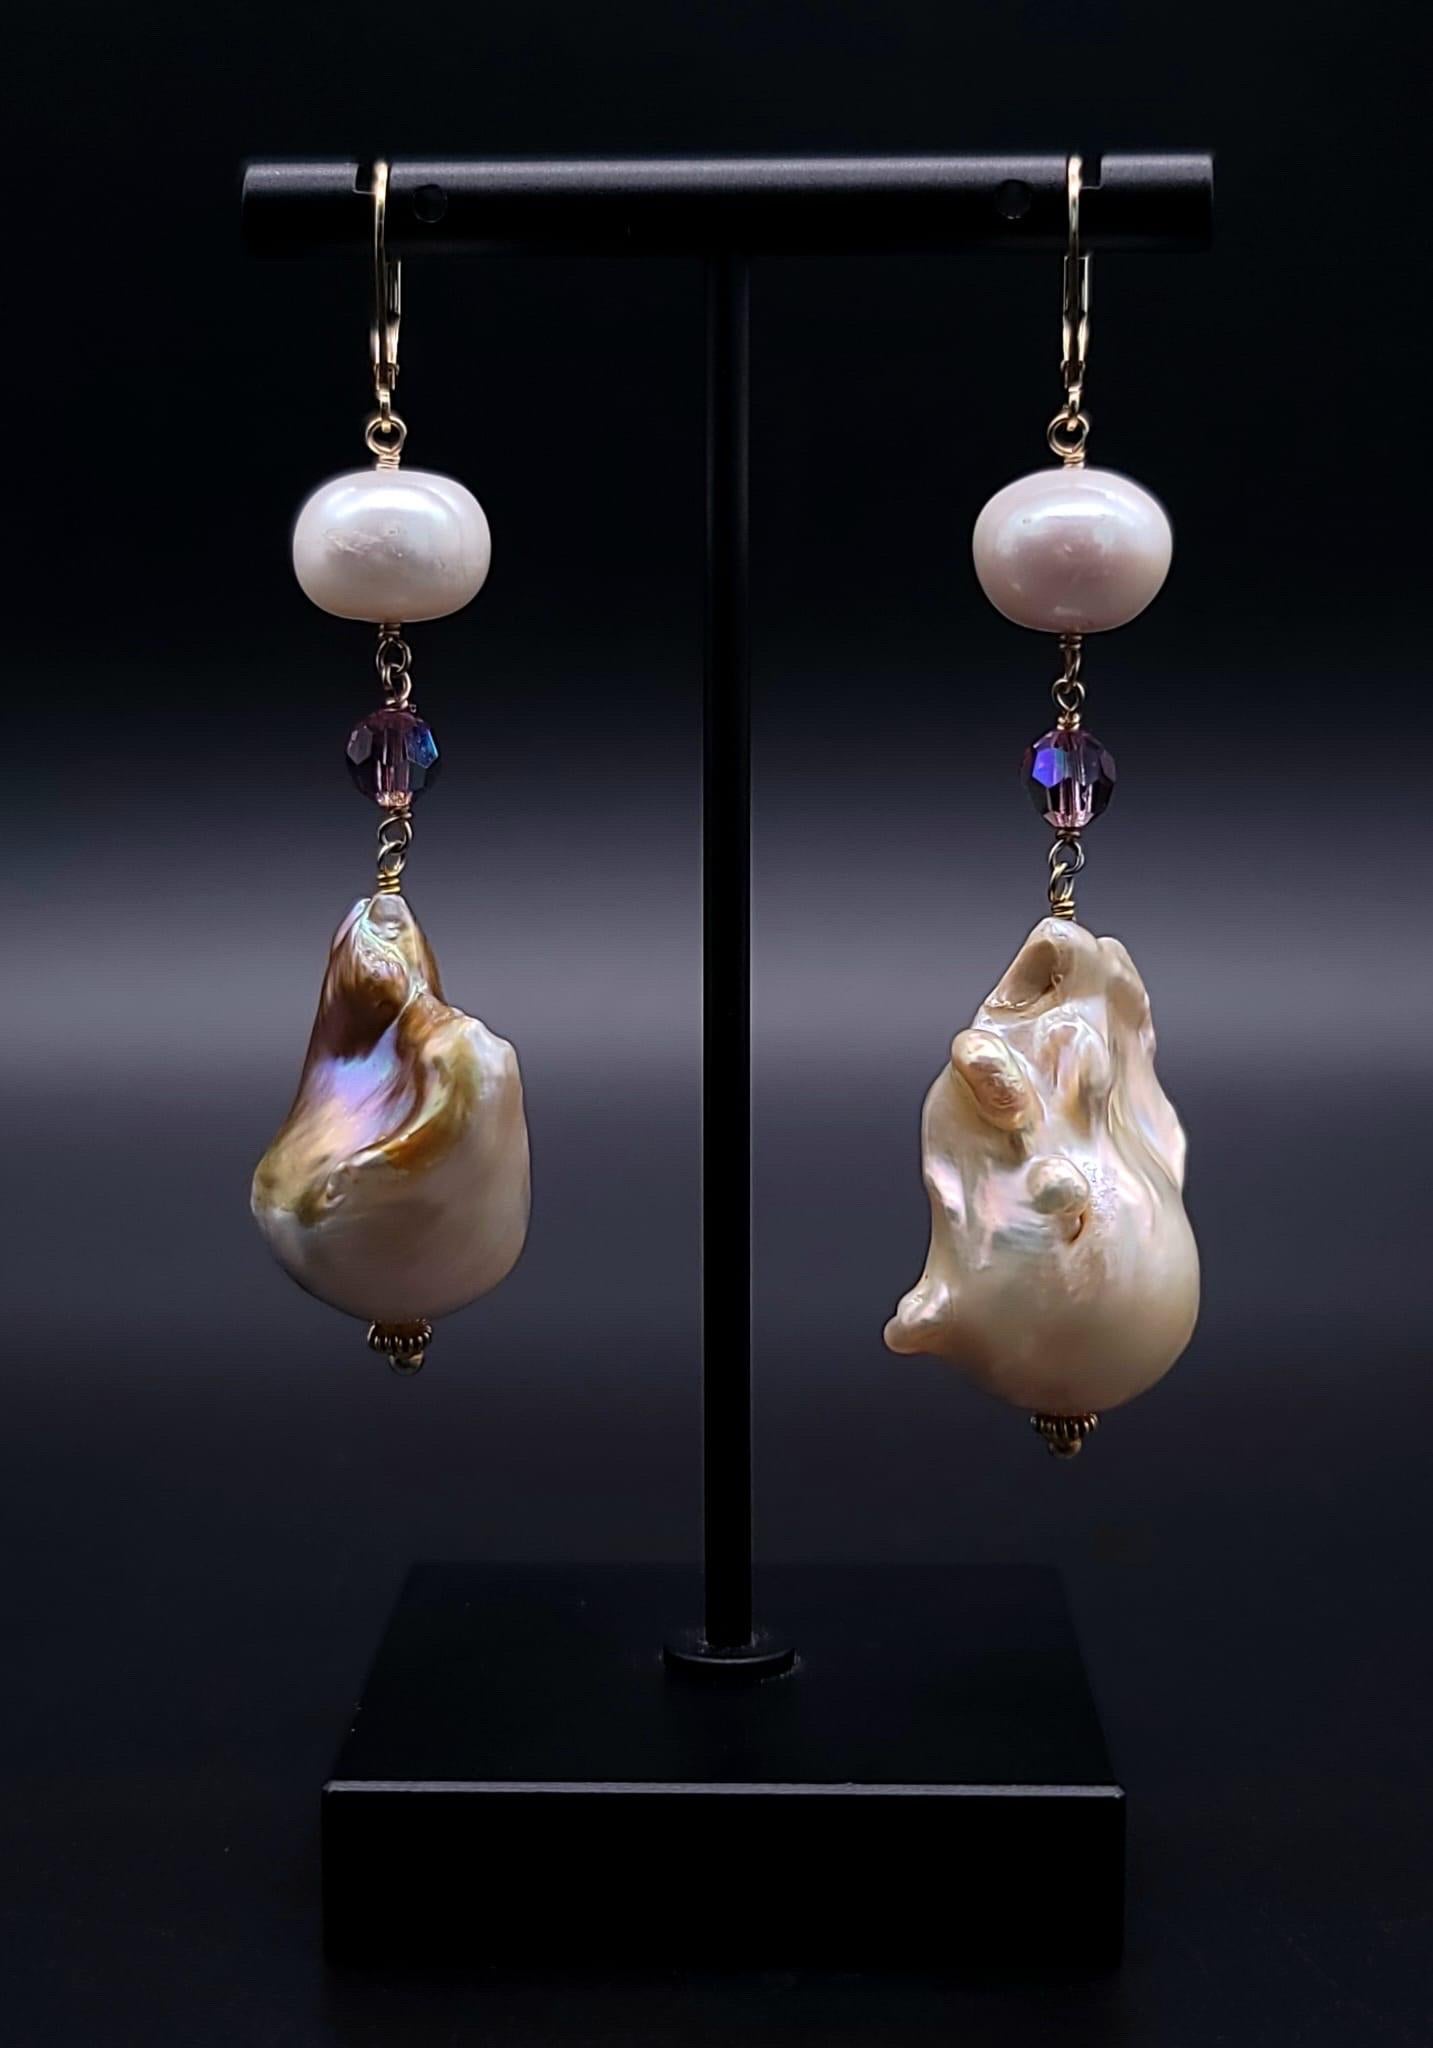 One-of-a-Kind

Introducing a pair of exquisite baroque pearl earrings adorned with Swarovski crystal - a captivating combination that fuses the allure of organic beauty with the brilliance of precision-cut gemstones.

Each earring features a